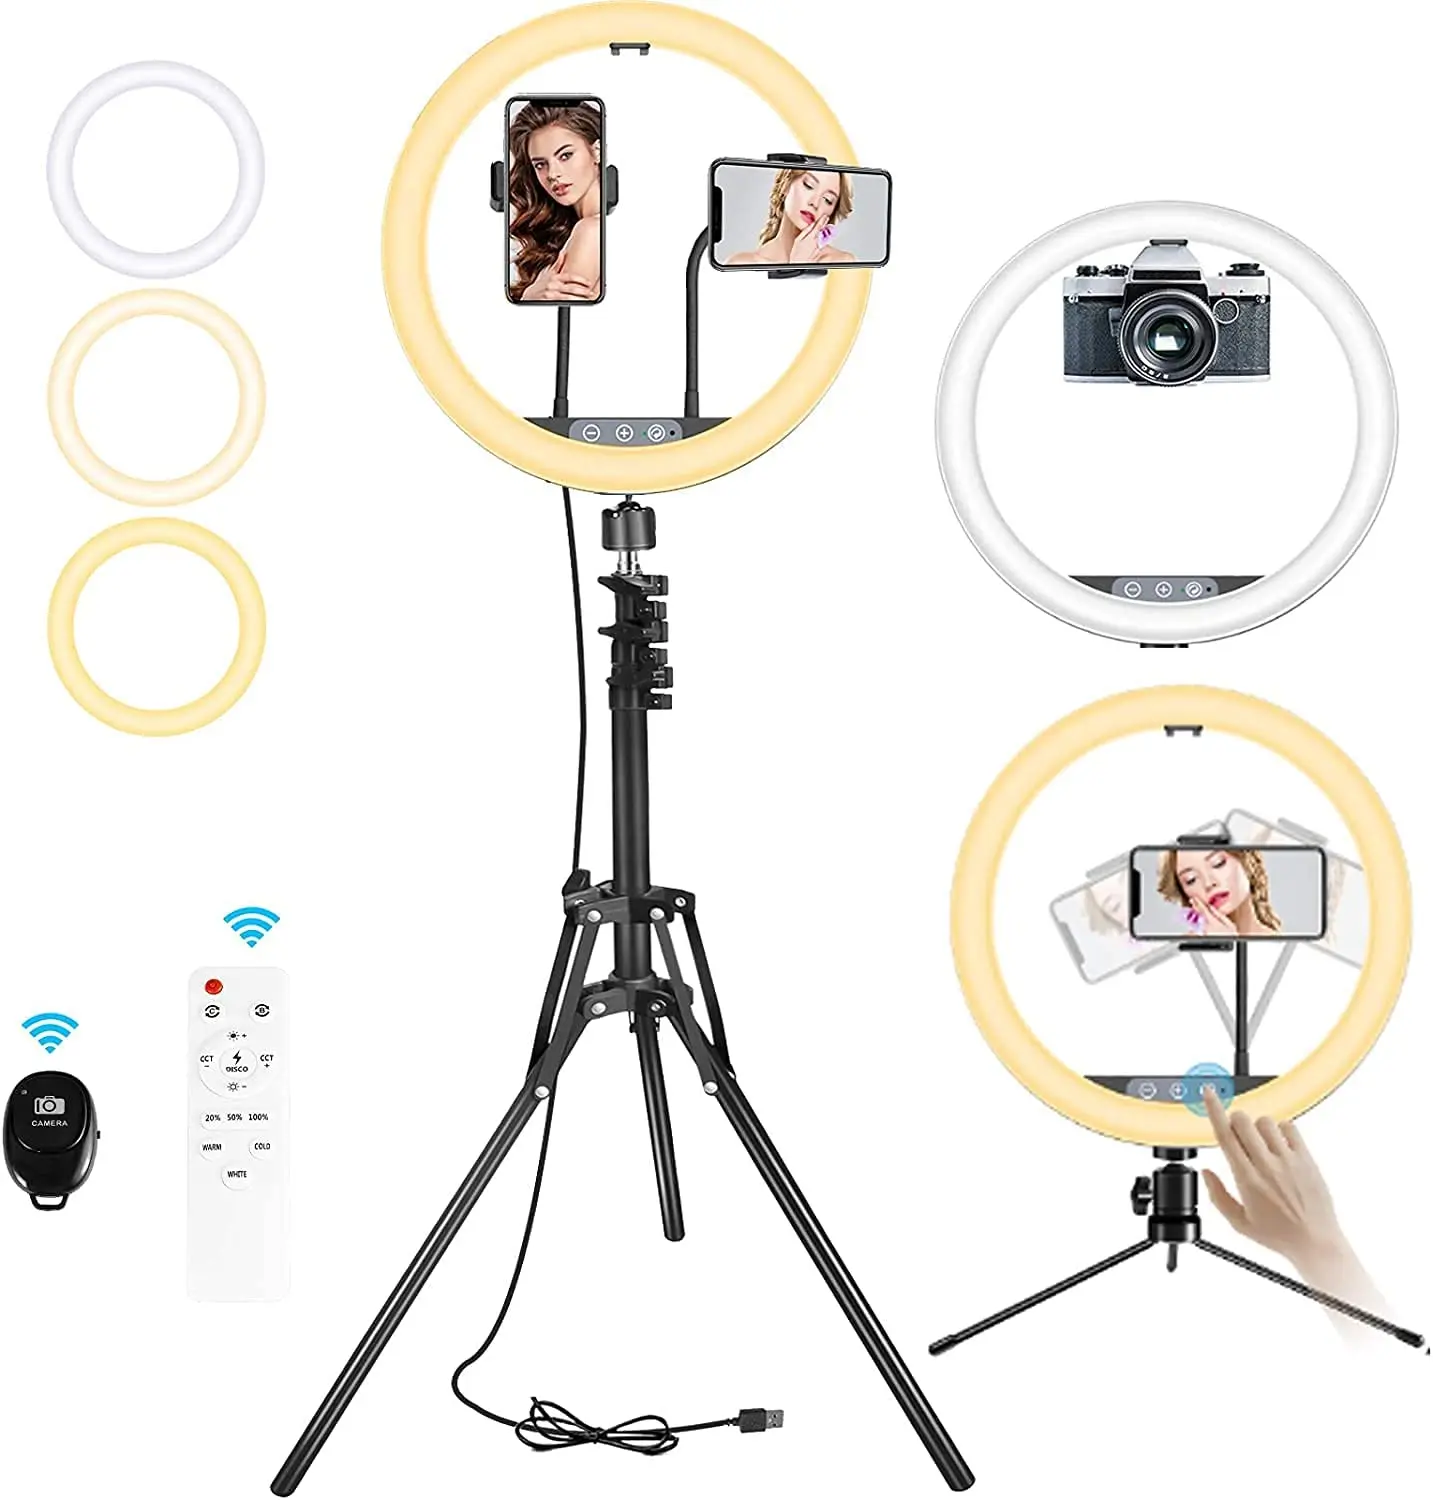 

12" Selfie Ring Light Fill Light - Dimmable LED Live Stream/Makeup/YouTube Video 2 Tripod Stands & 2 Phone Holders & 3 Color Mo